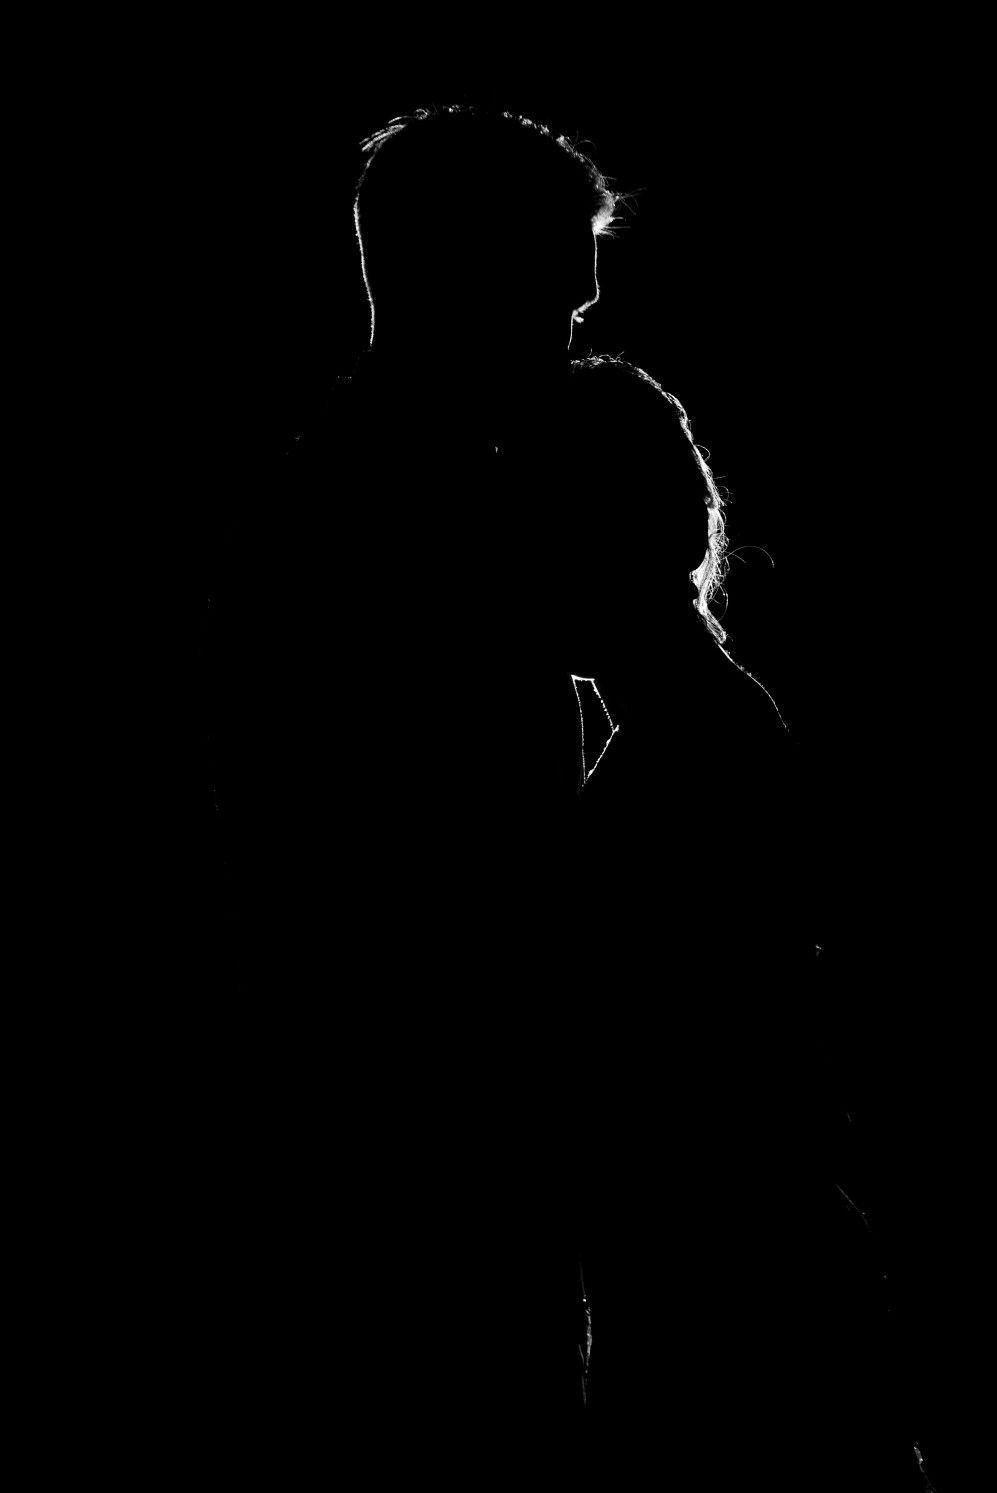 Mighty feelings. Man and woman silhouette, Black background photography, Black and white couples